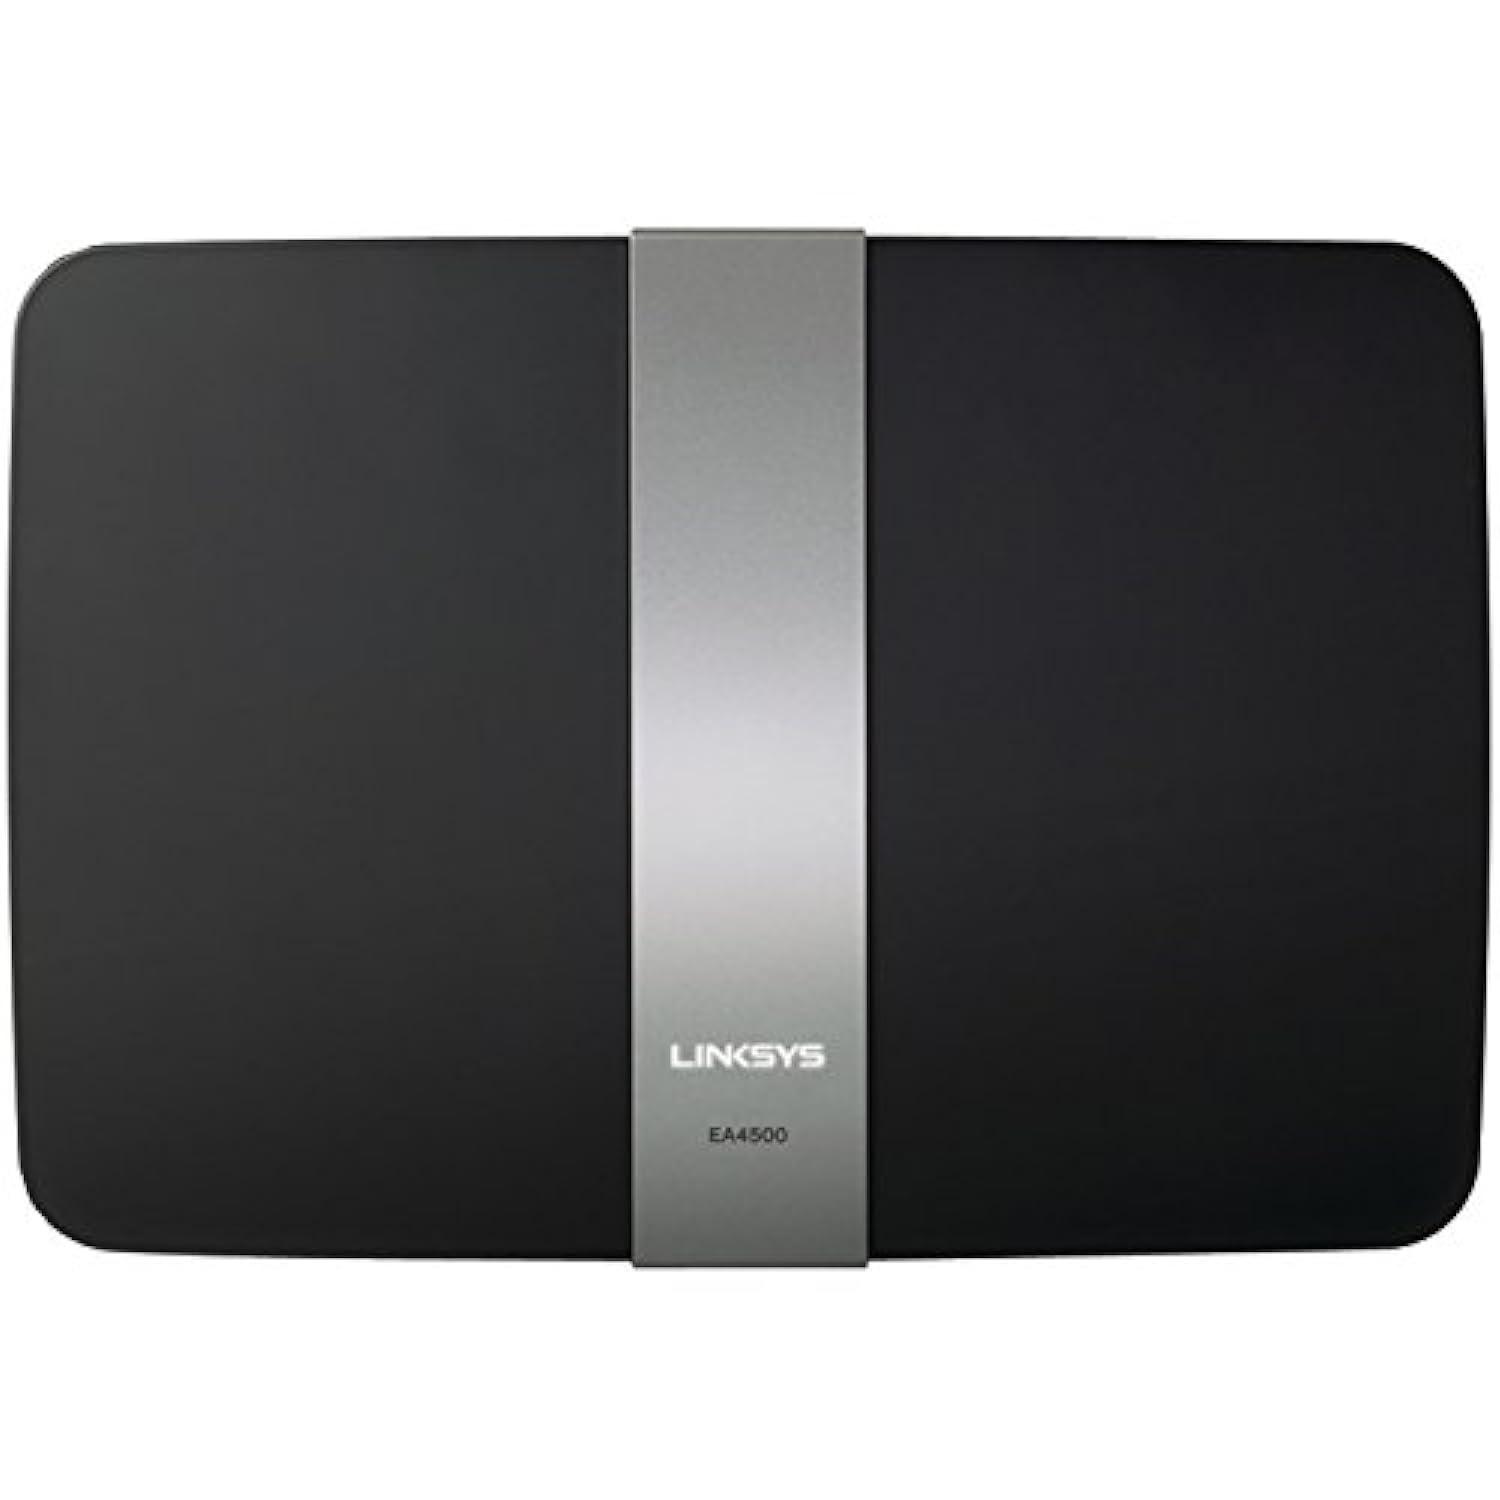 linksys n900 wi-fi wireless dual-band+ router with gigabit & usb ports, smart wi-fi app enabled to control your network from 